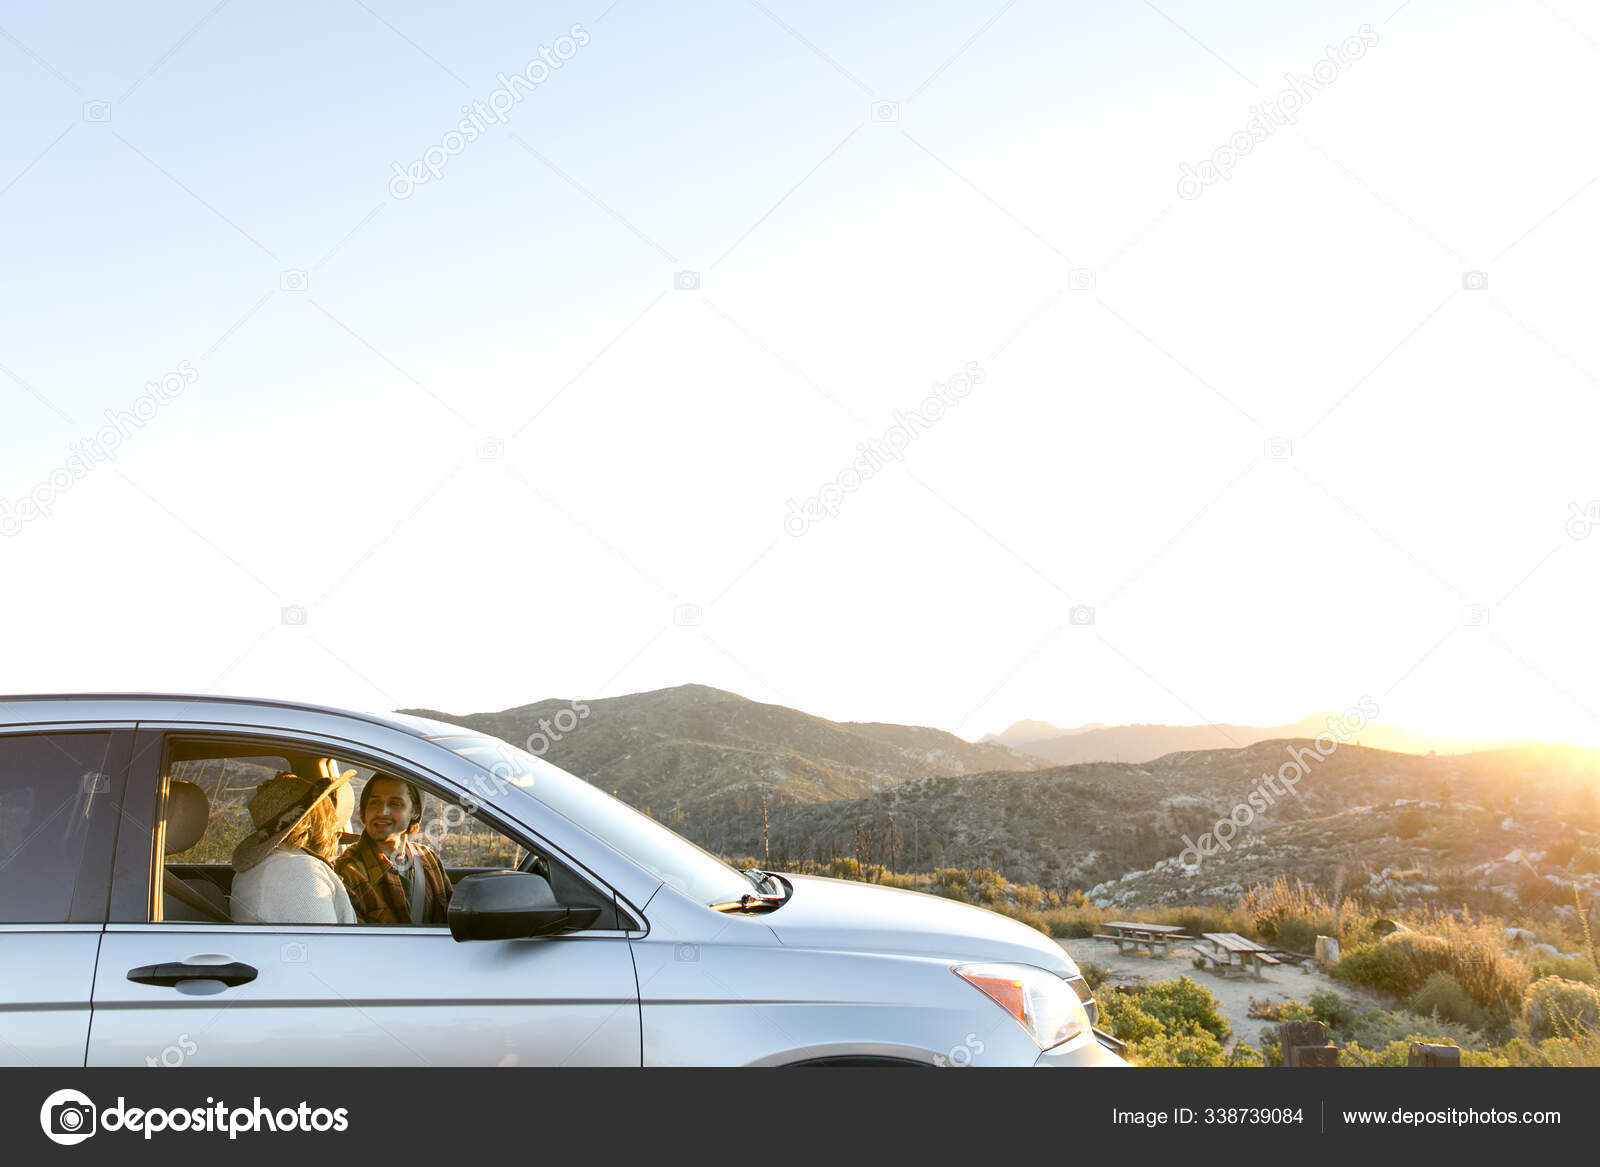 Young Couple Car Bonnet Kissing Chilao Campgrounds Los Angeles